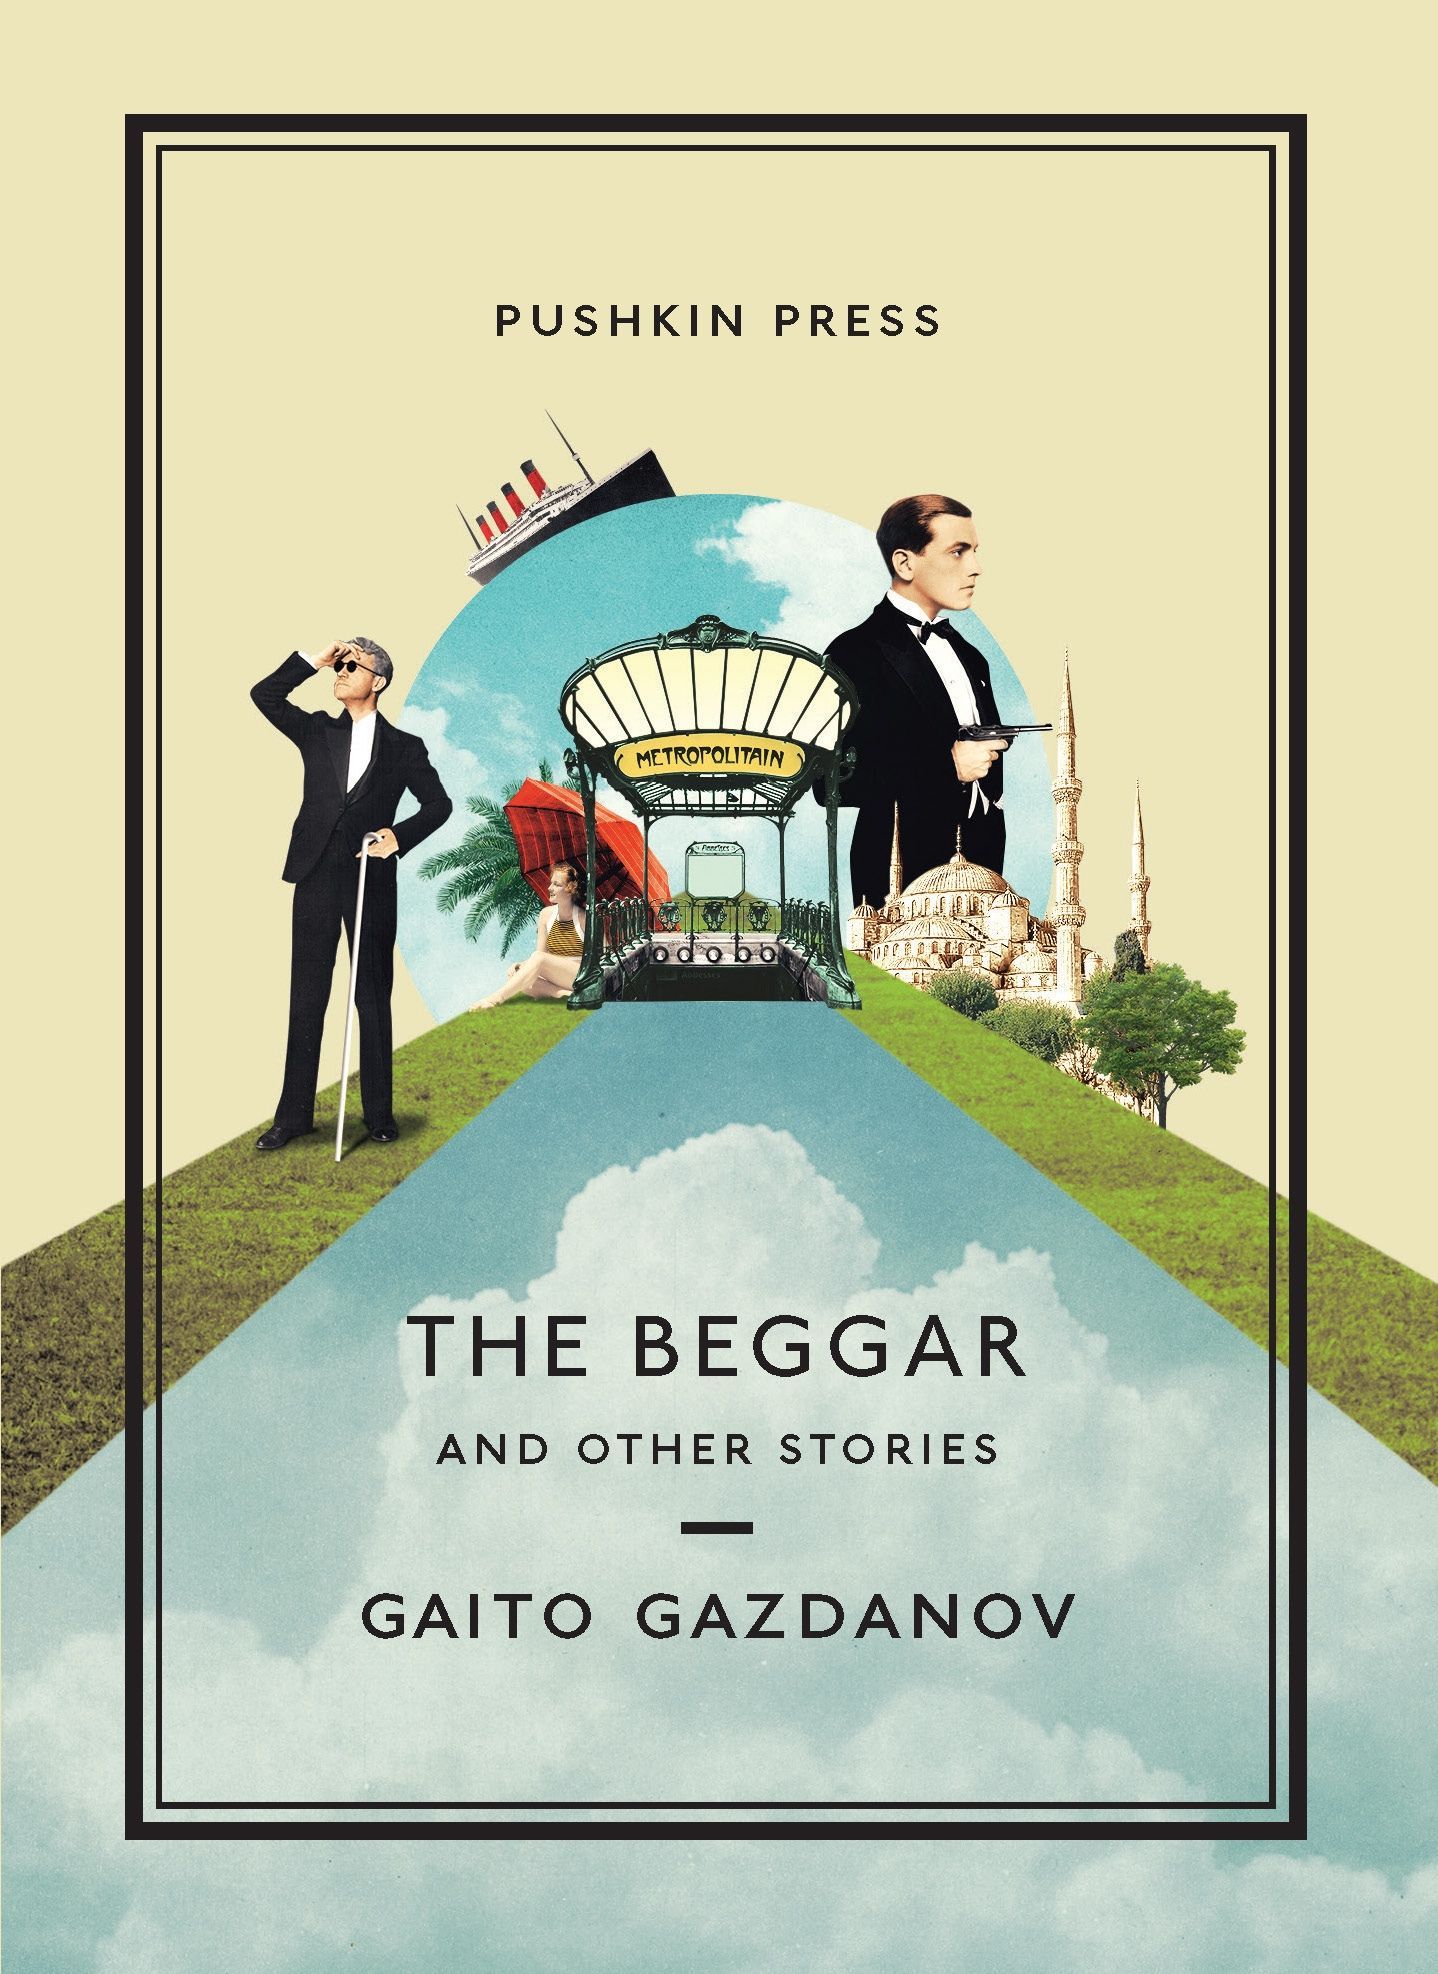 The Boy Who Stared Death in the Eye: On Gaito Gazdanov’s “The Beggar and Other Stories”